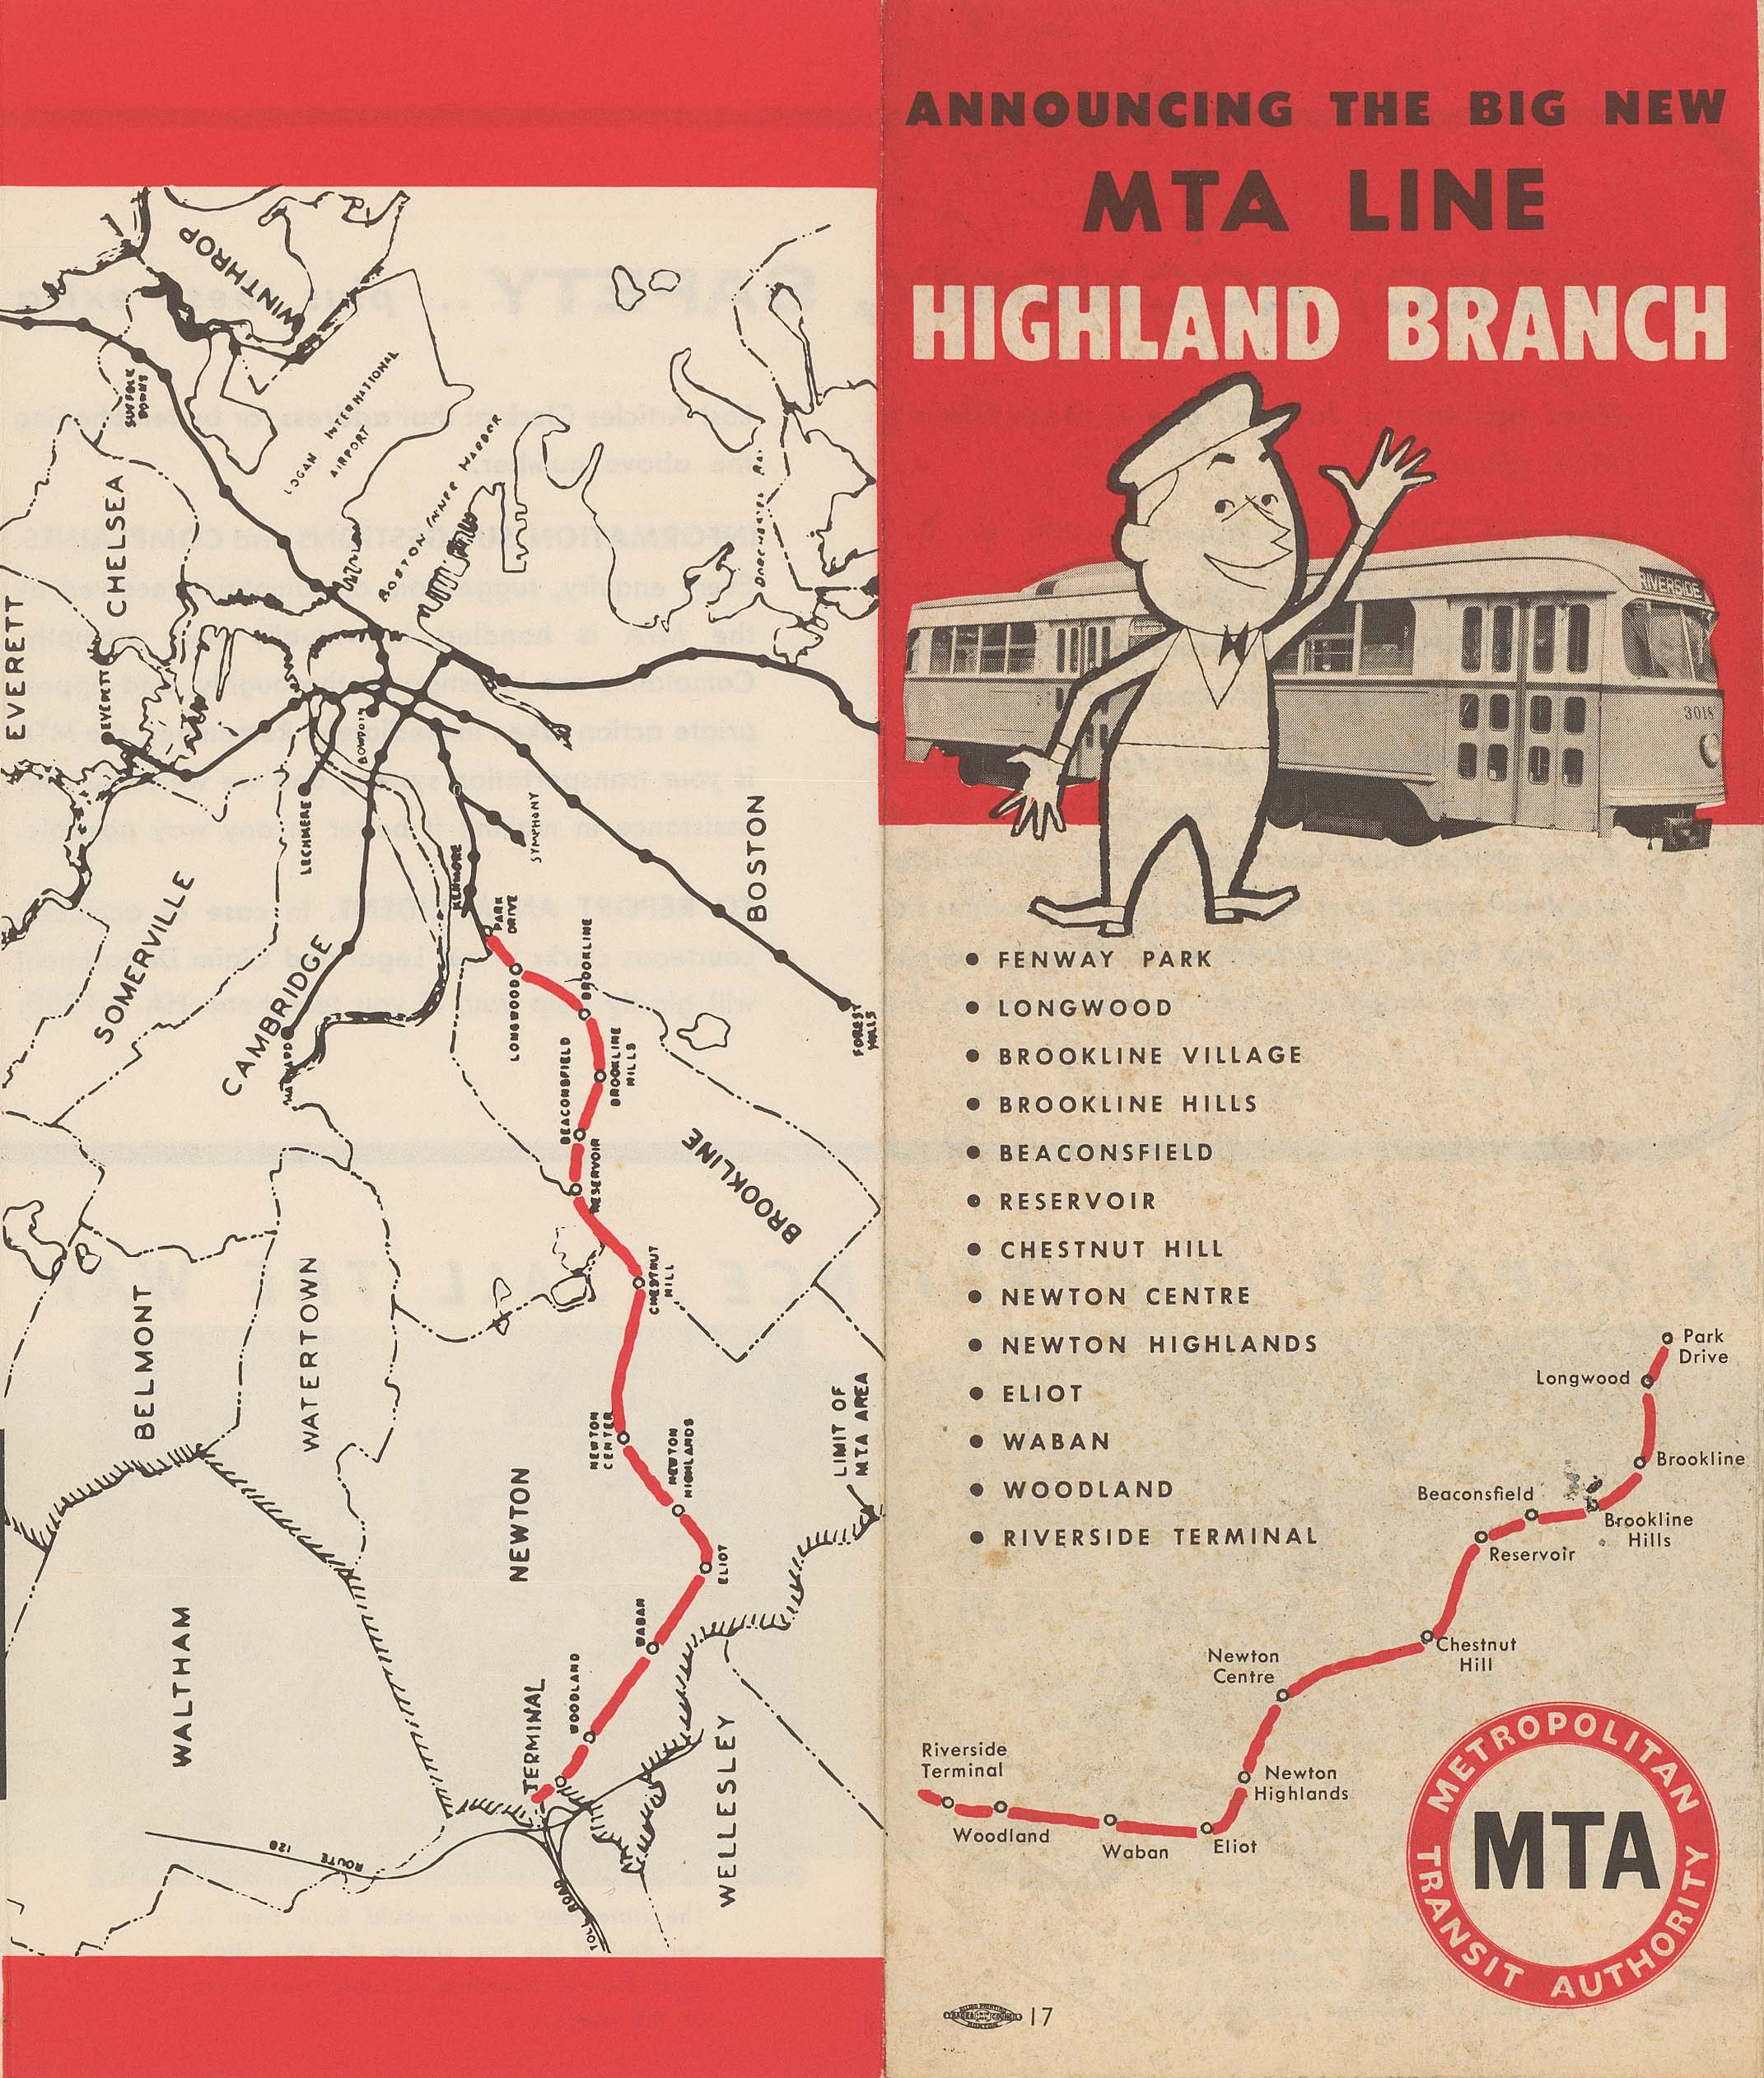 Image of Announcing the Big New MTA Line: Highland Branch